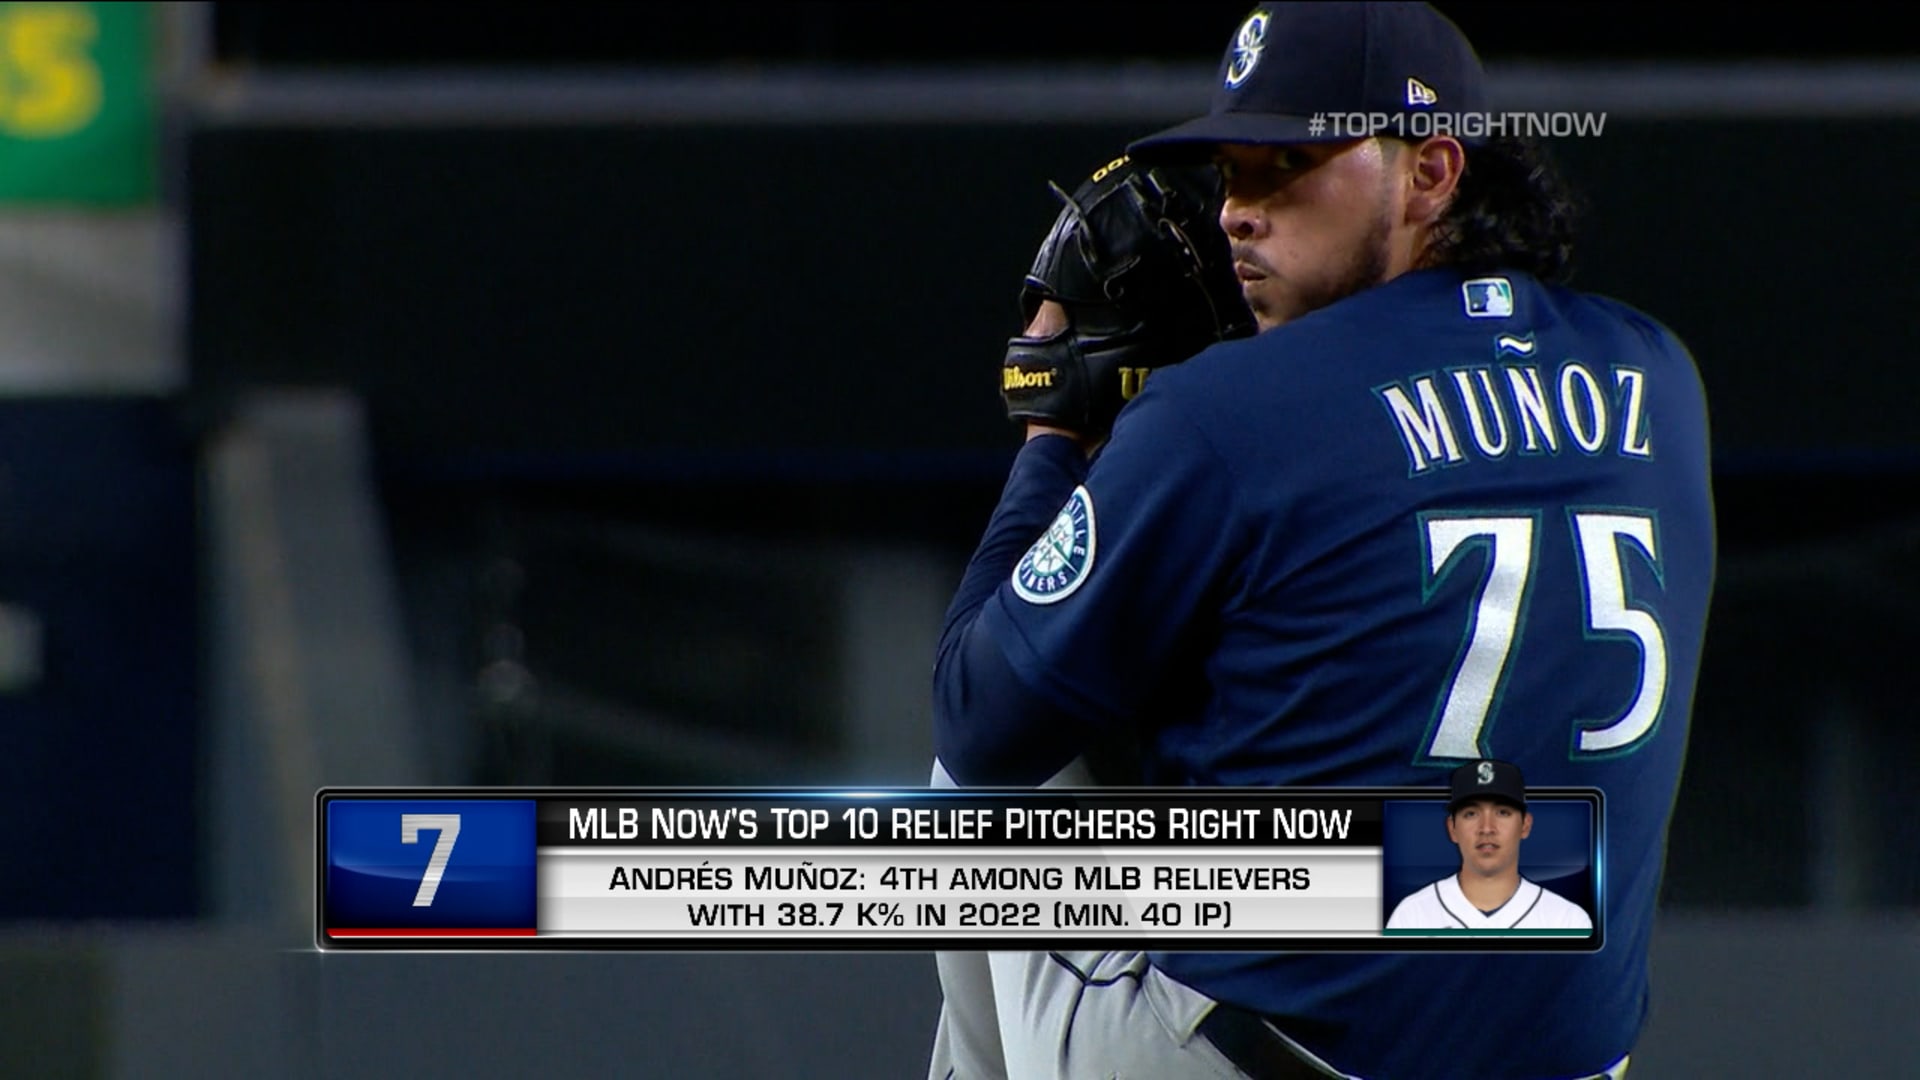 Top 10 Relief Pitchers in the MLB